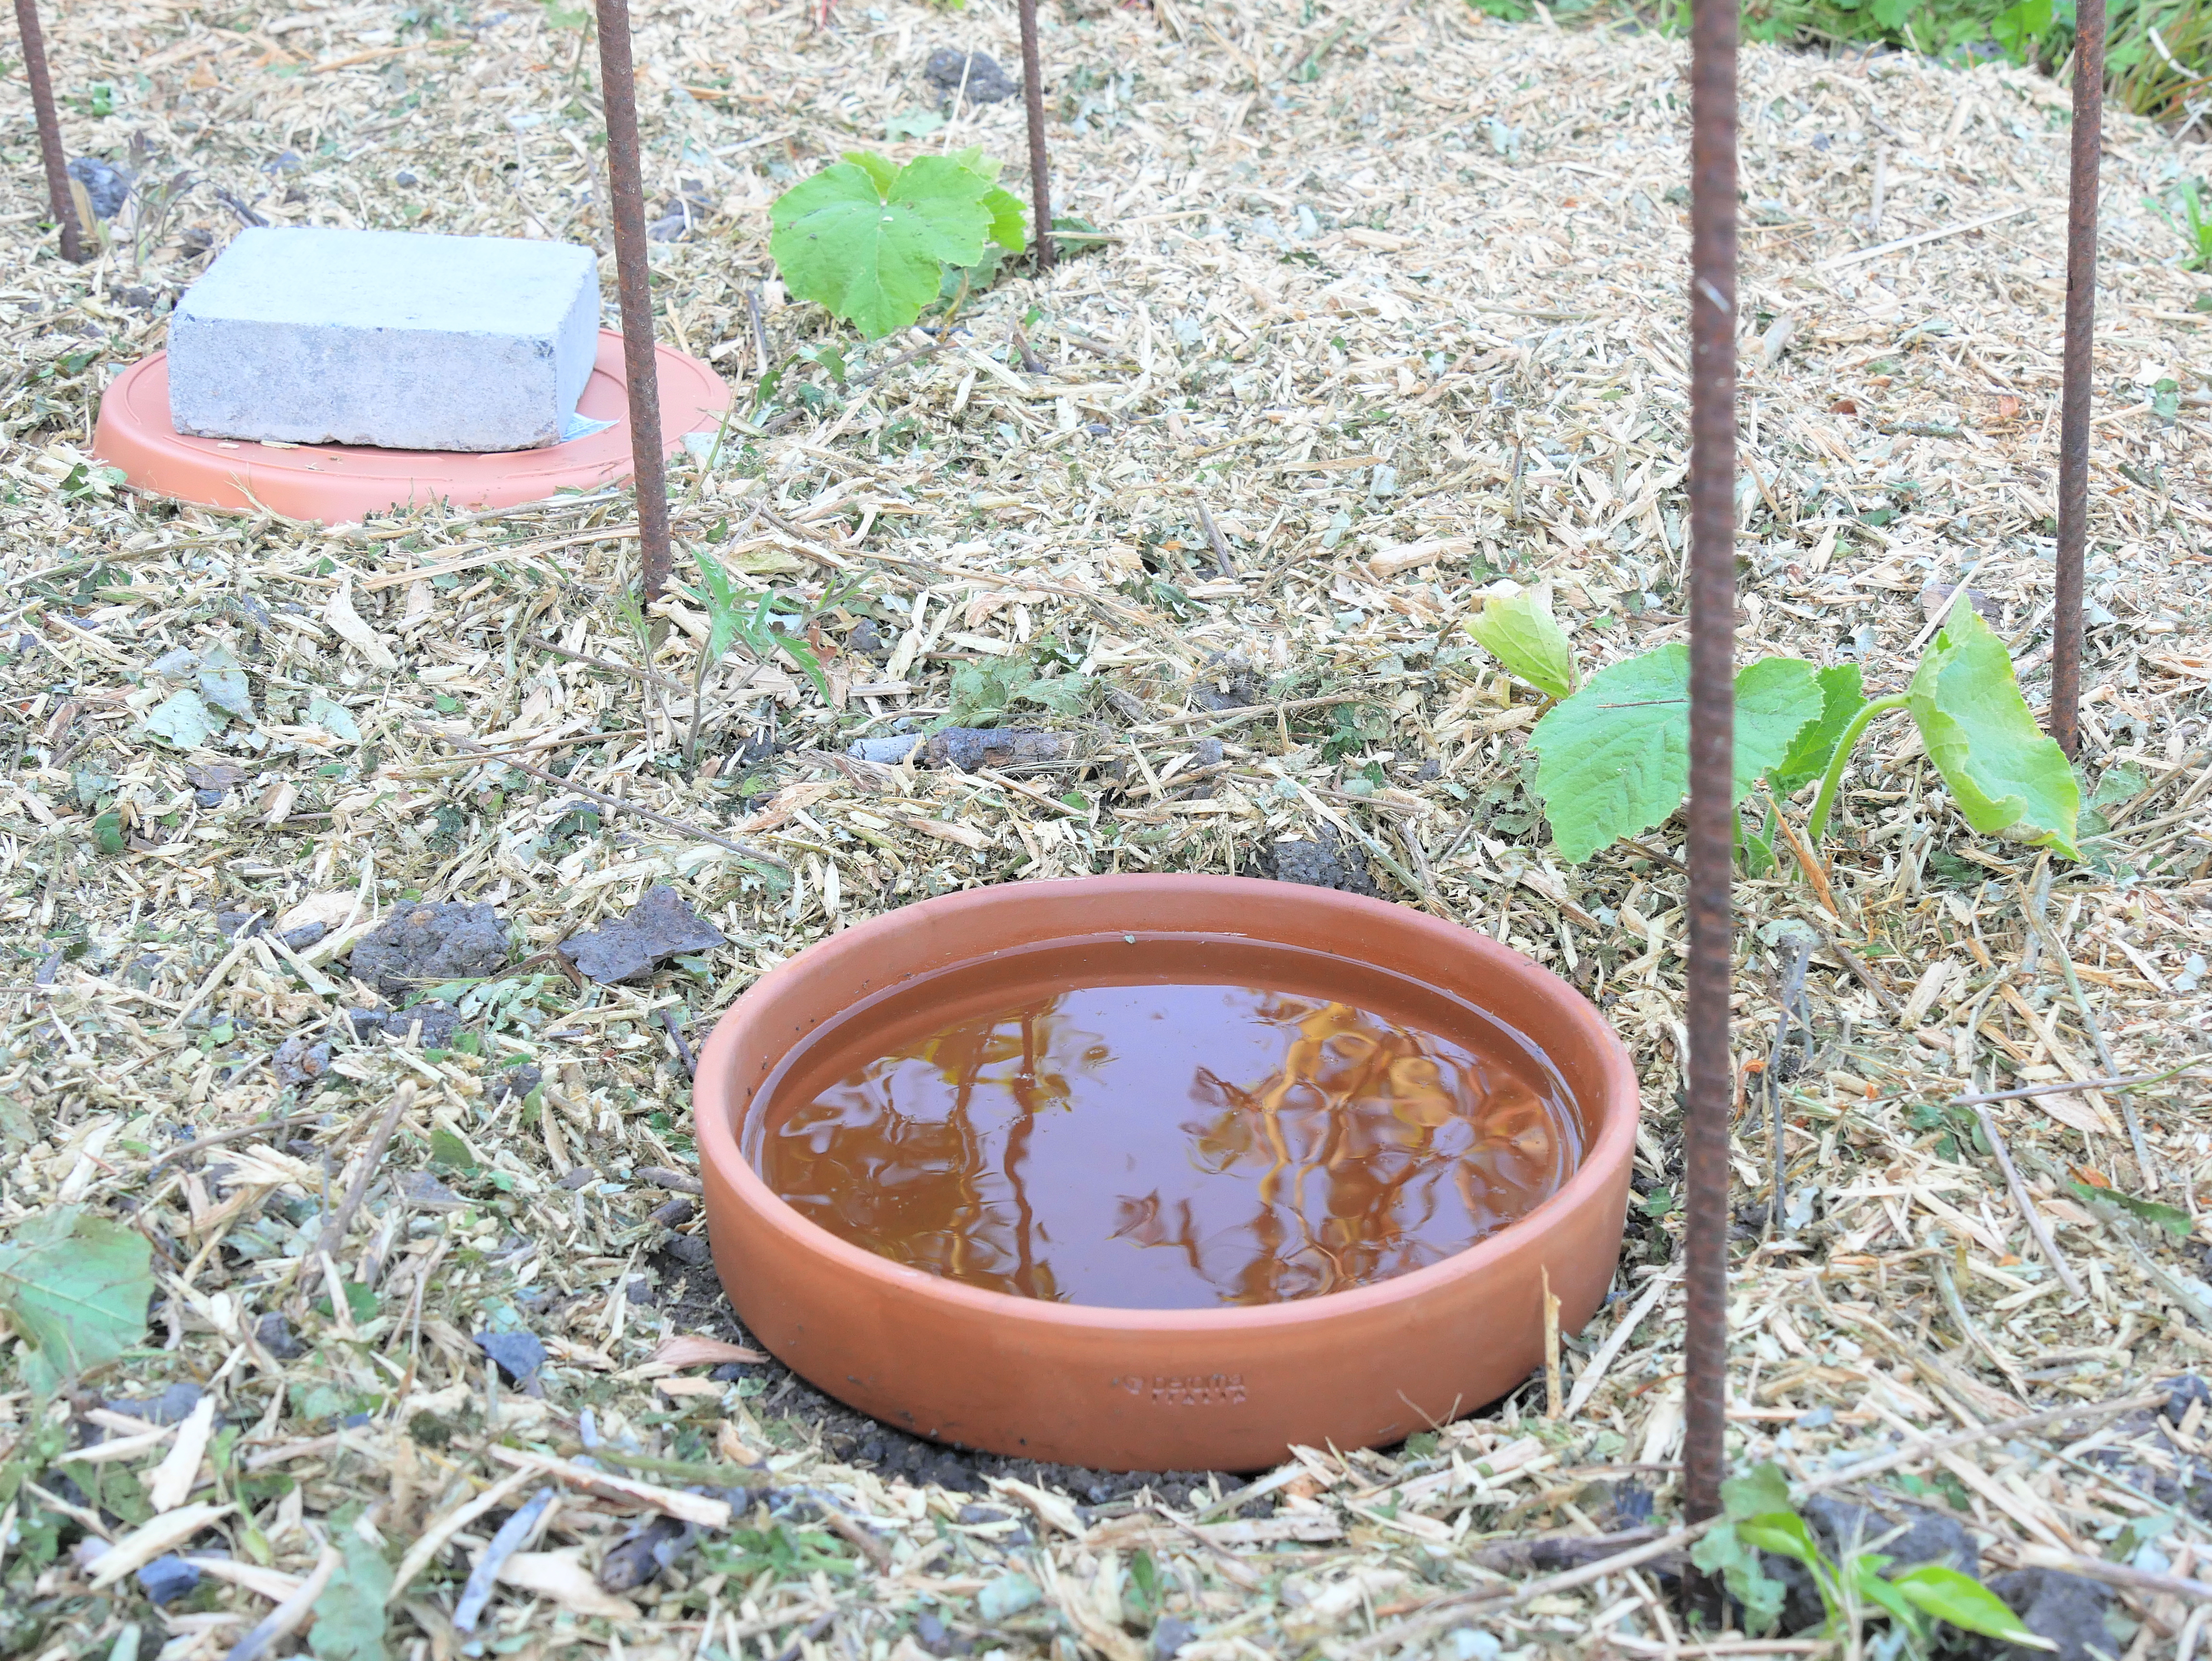 Ollas and other tricks to save water gardening